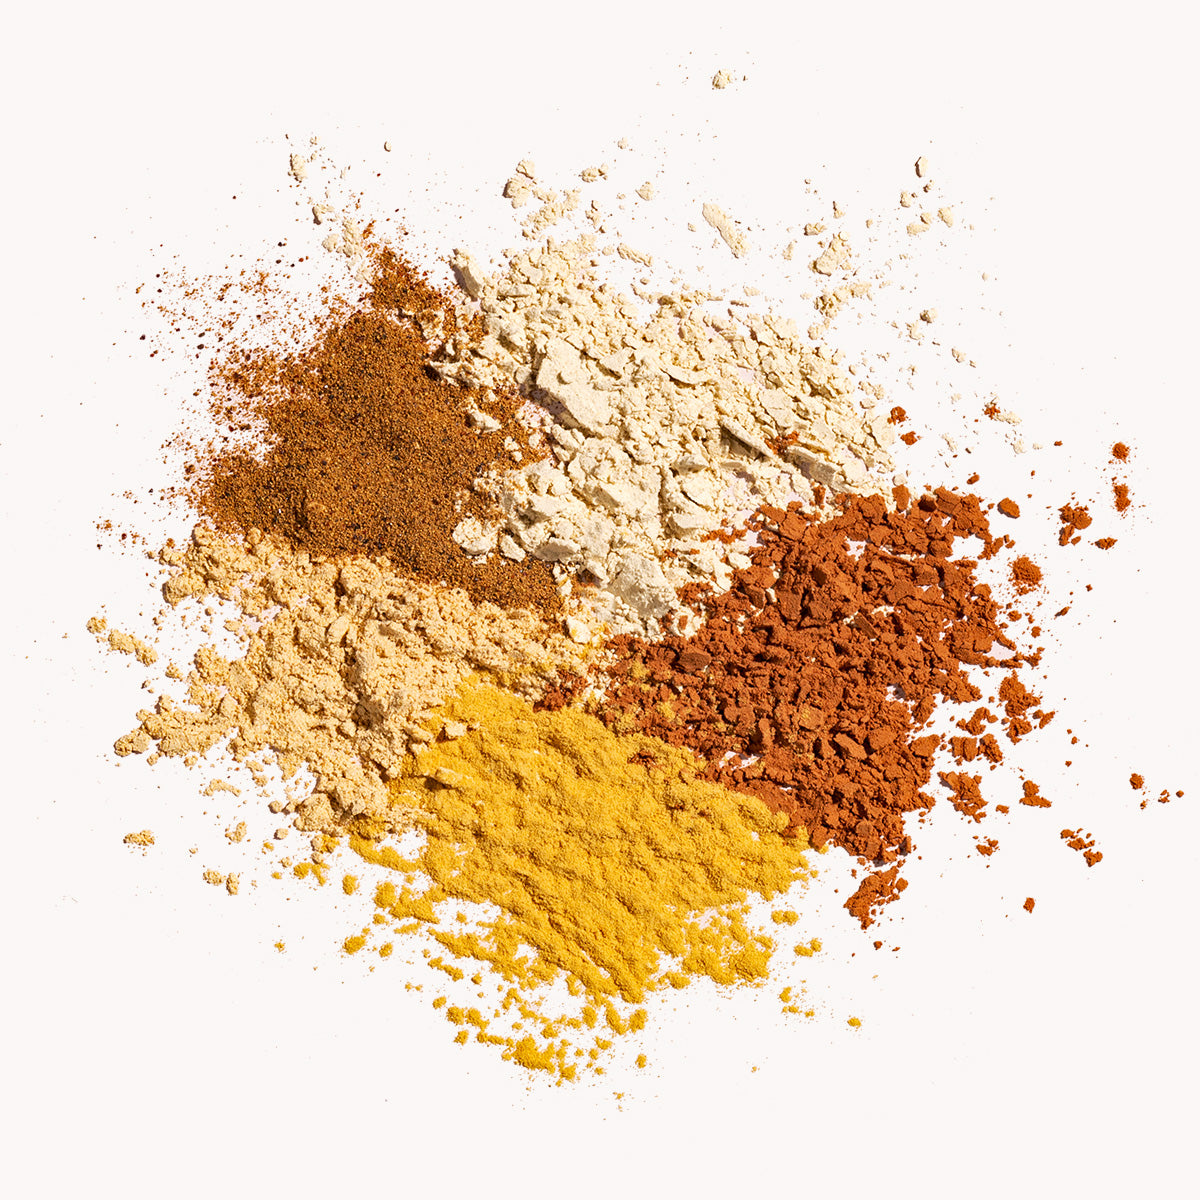 Turmeric, ashwagandha, maca and cacao powders on a white background